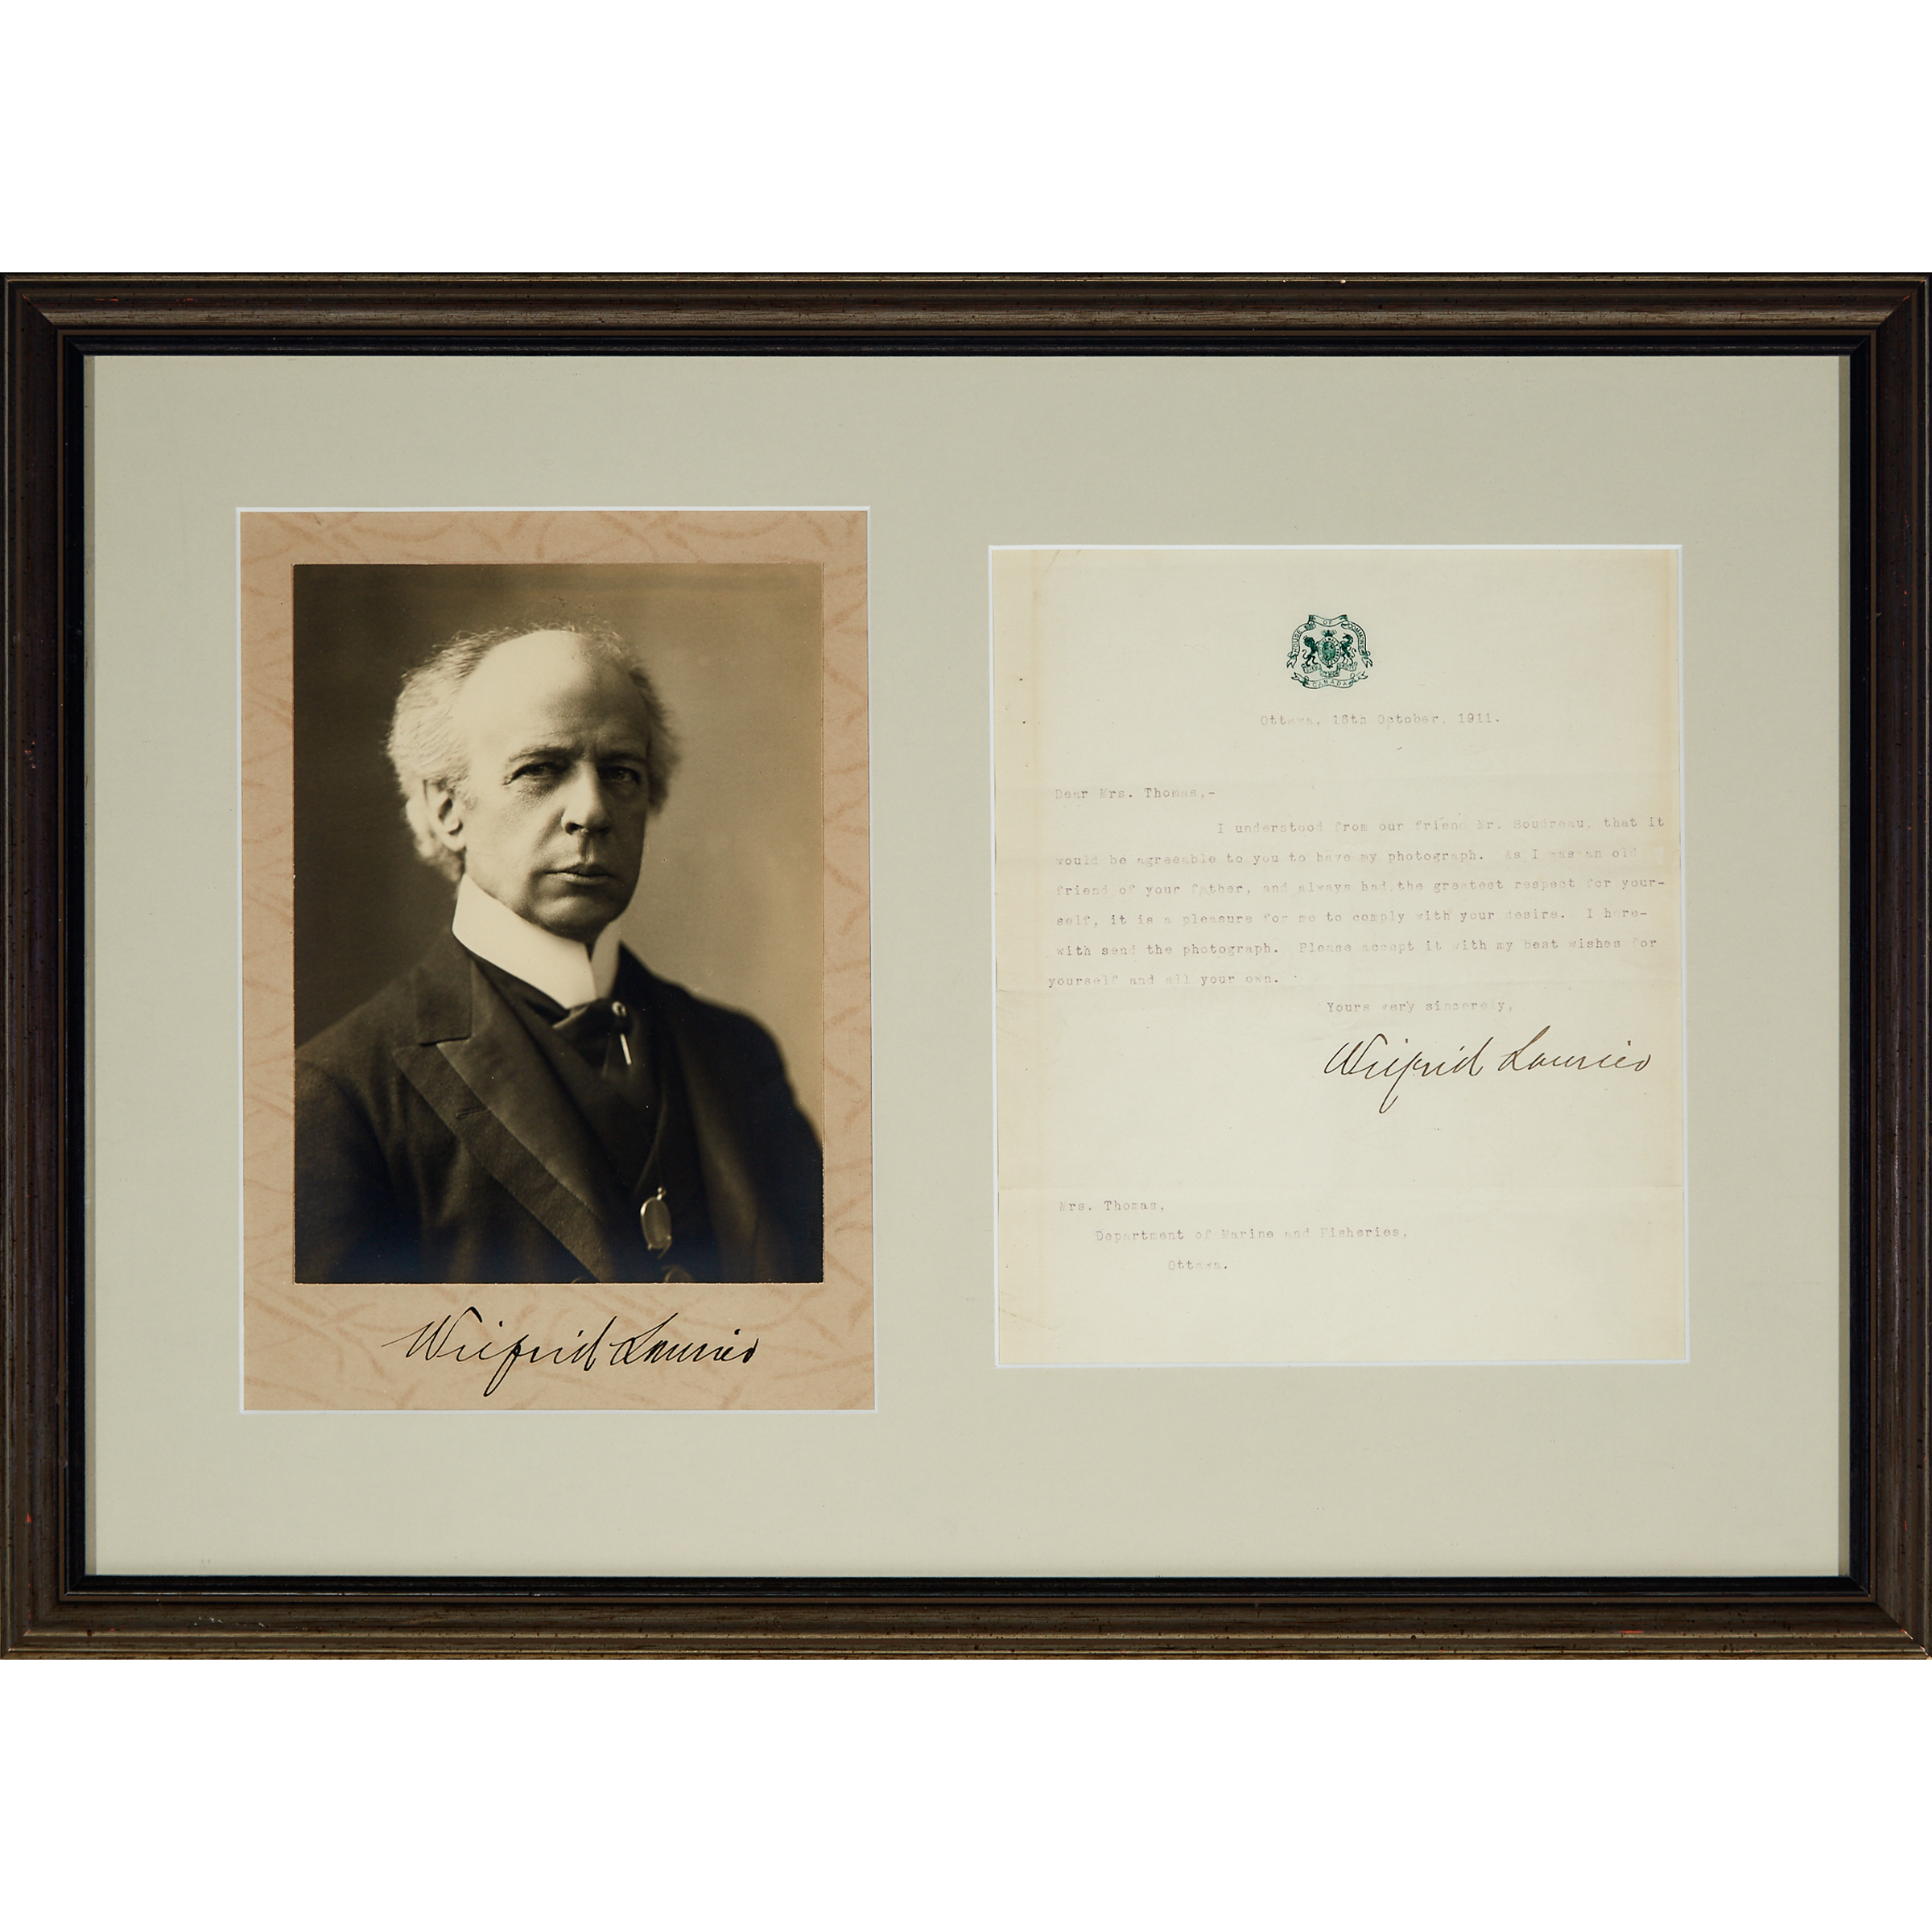 Sir Wilfrid Laurier Autographed Portrait and Letter, 1911 